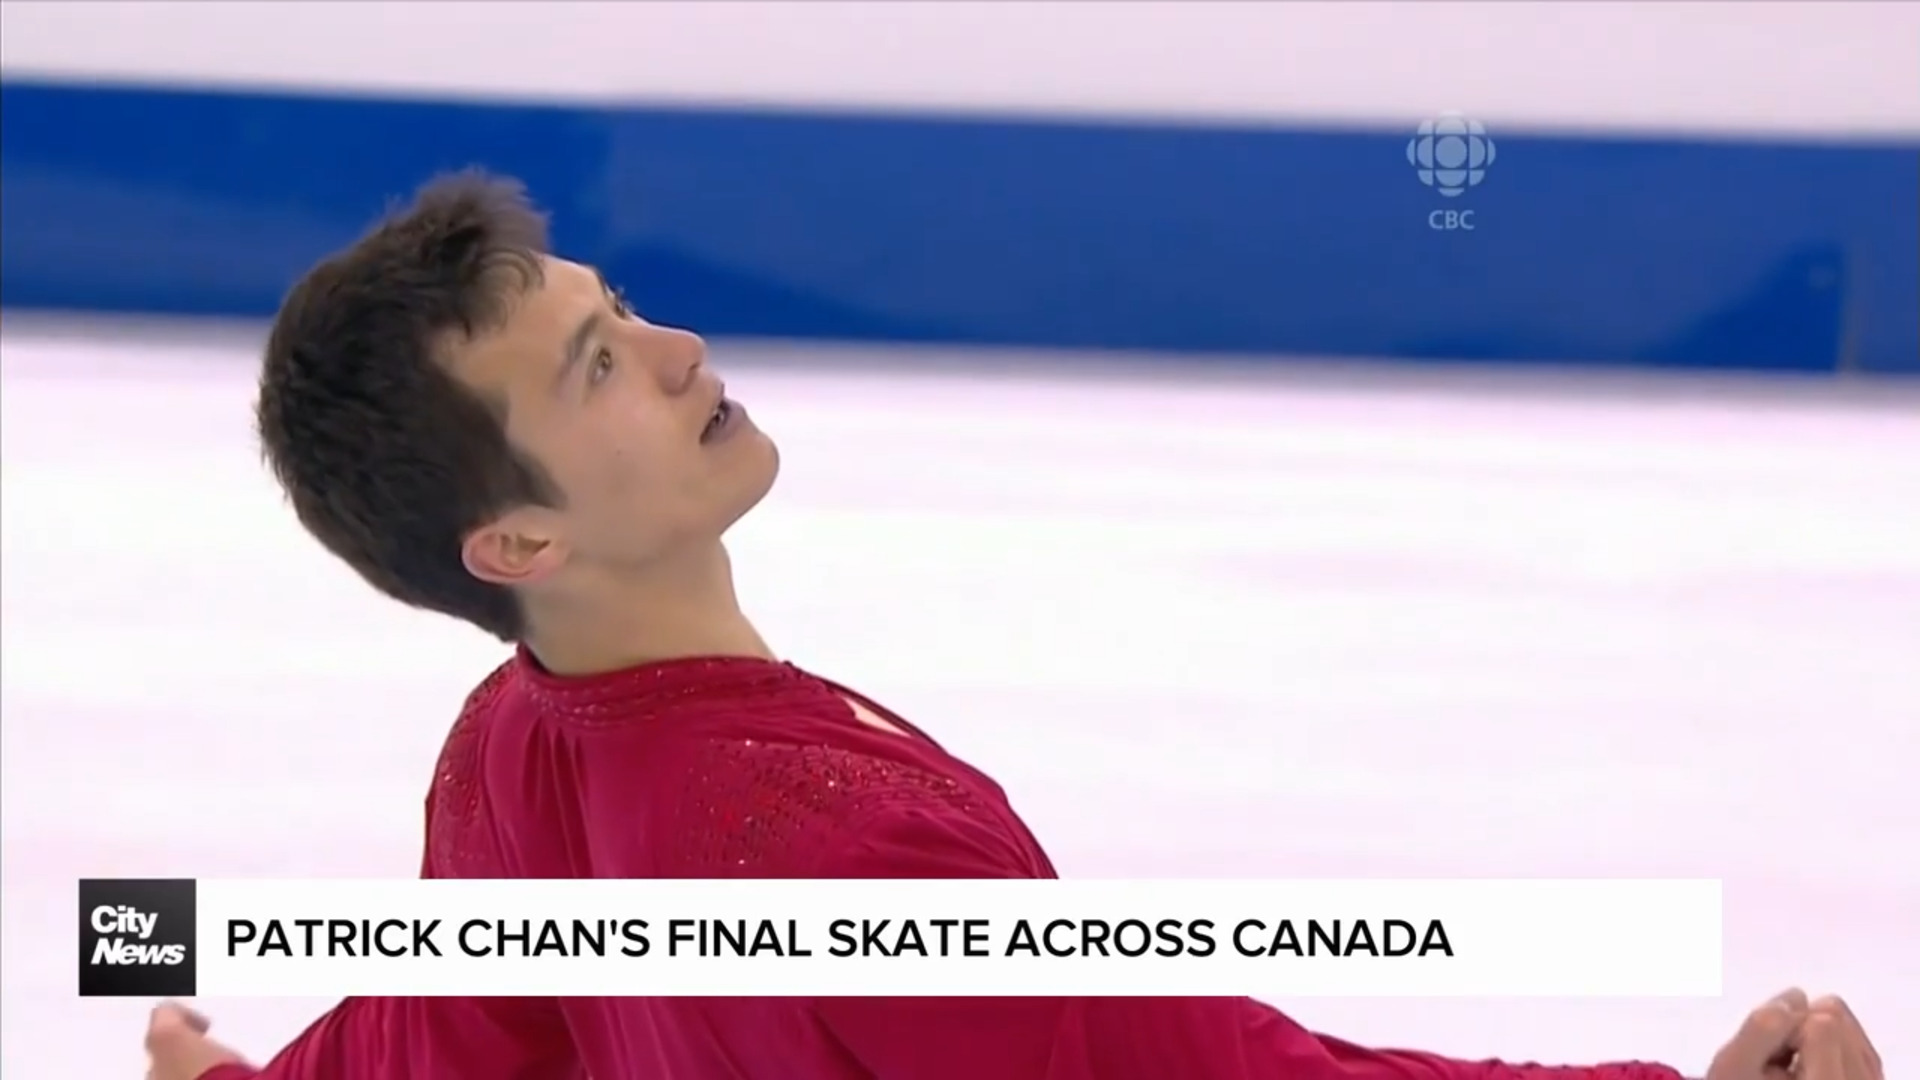 Patrick Chan going on one final skate across Canada